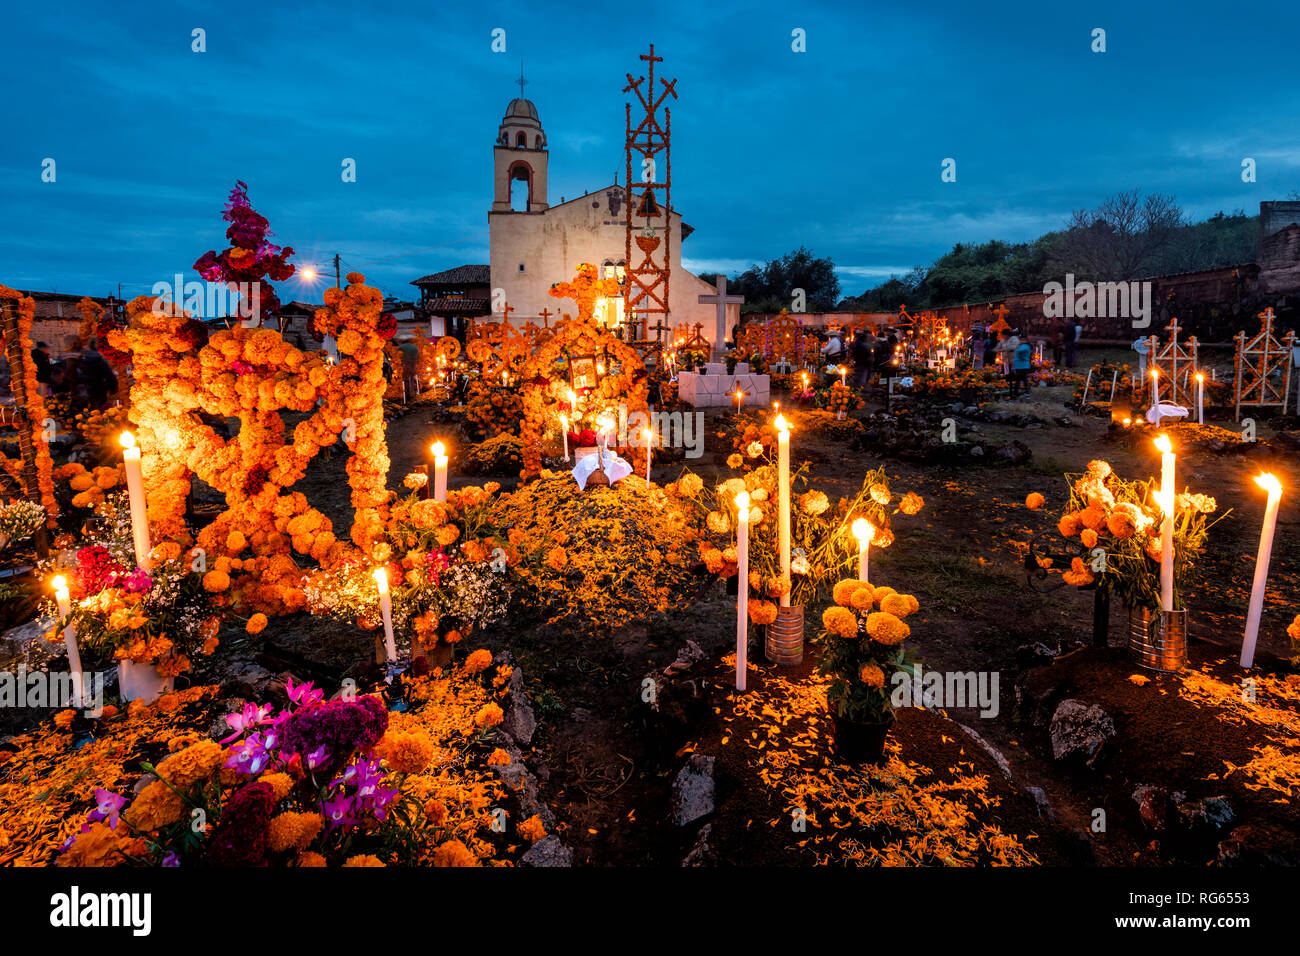 Cemetery and church on Day of the Dead in Arocutin, Michoacan, Mexico. Stock Photo